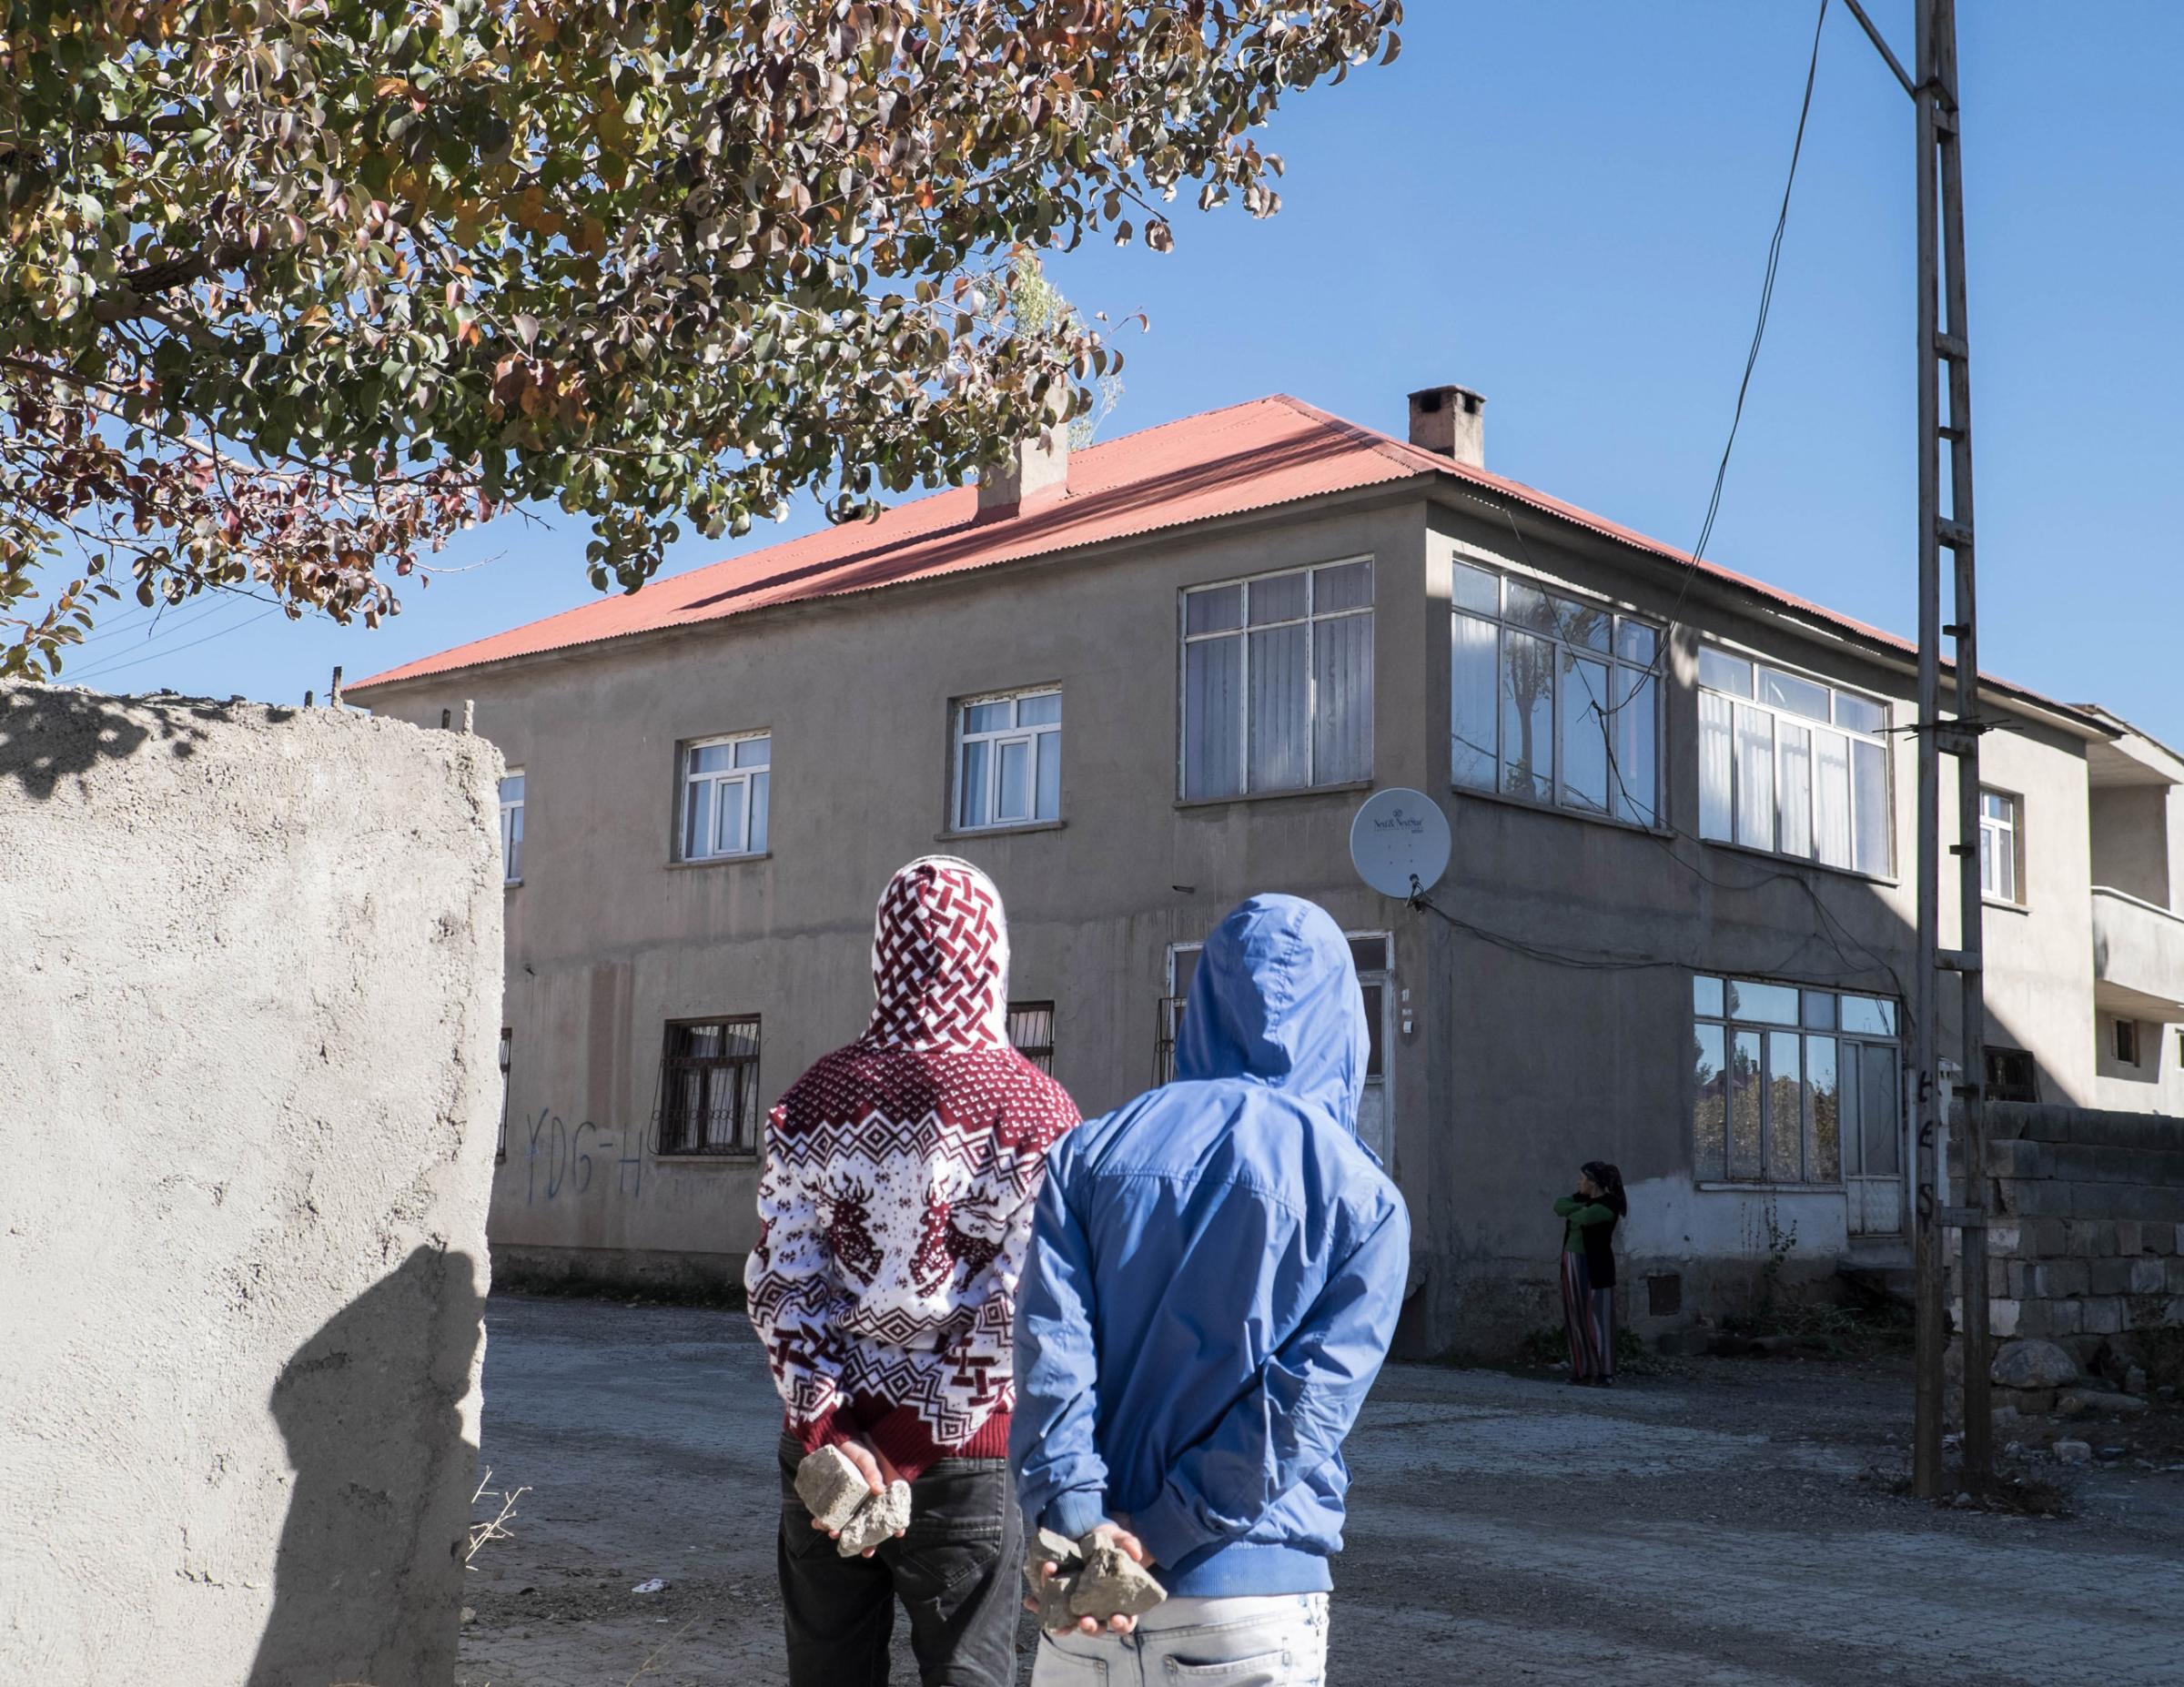 YUKSEKOVA, TURKEY - NOVEMBER 03, 2015: Young Kurds are seen during clashes against Turkish police forces in Cumhuriyet, a self declared autonomous neighborhood in Yuksekova. Clashes broke out after that police tried to enter into the neighborhood in early morning.